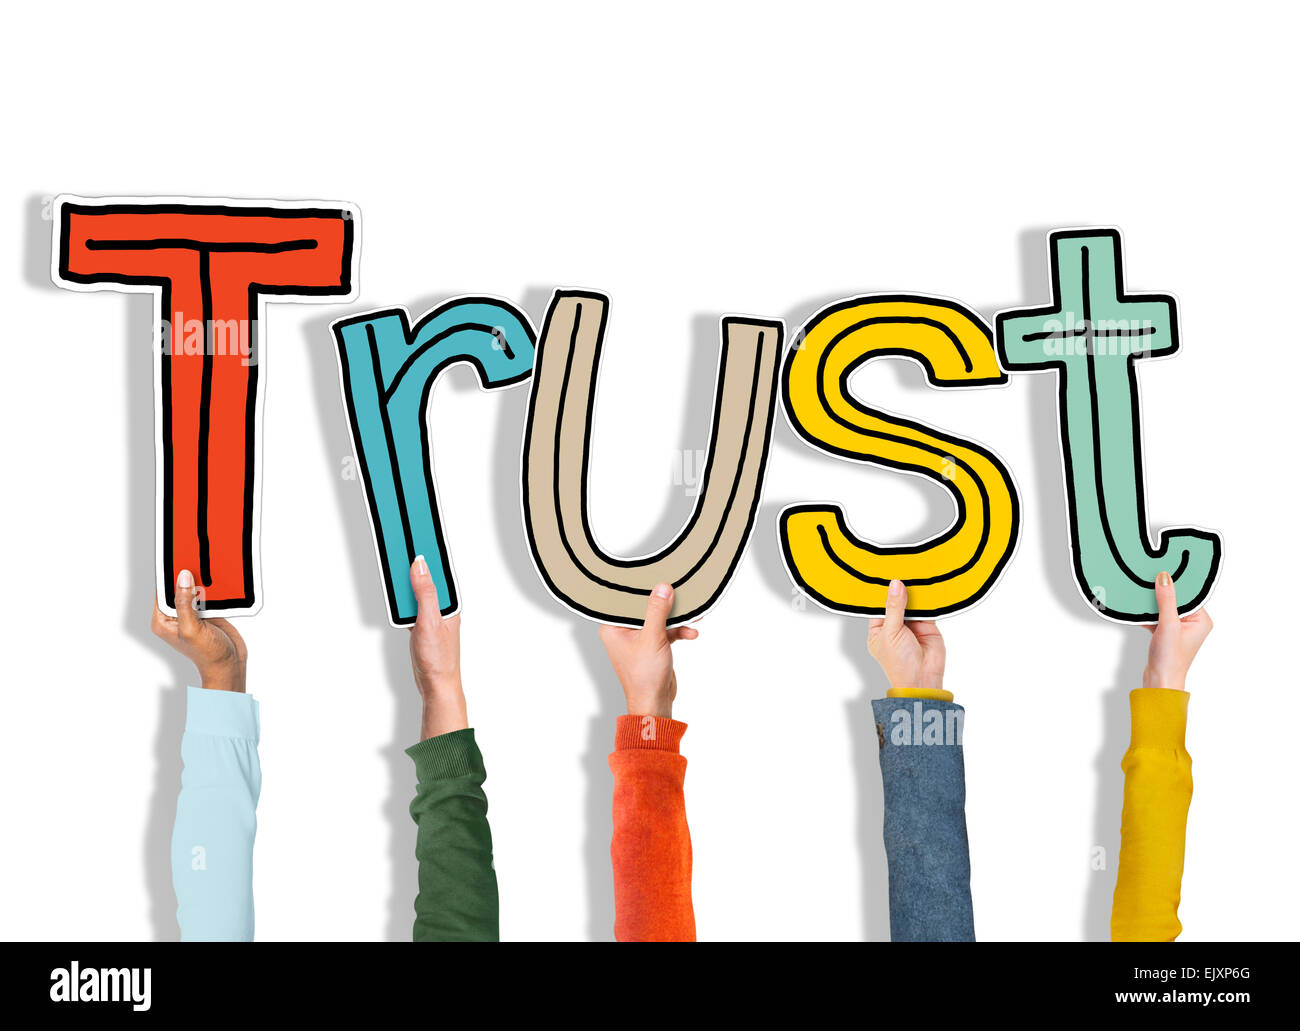 Group of Hands Holding Letter Trust Stock Photo